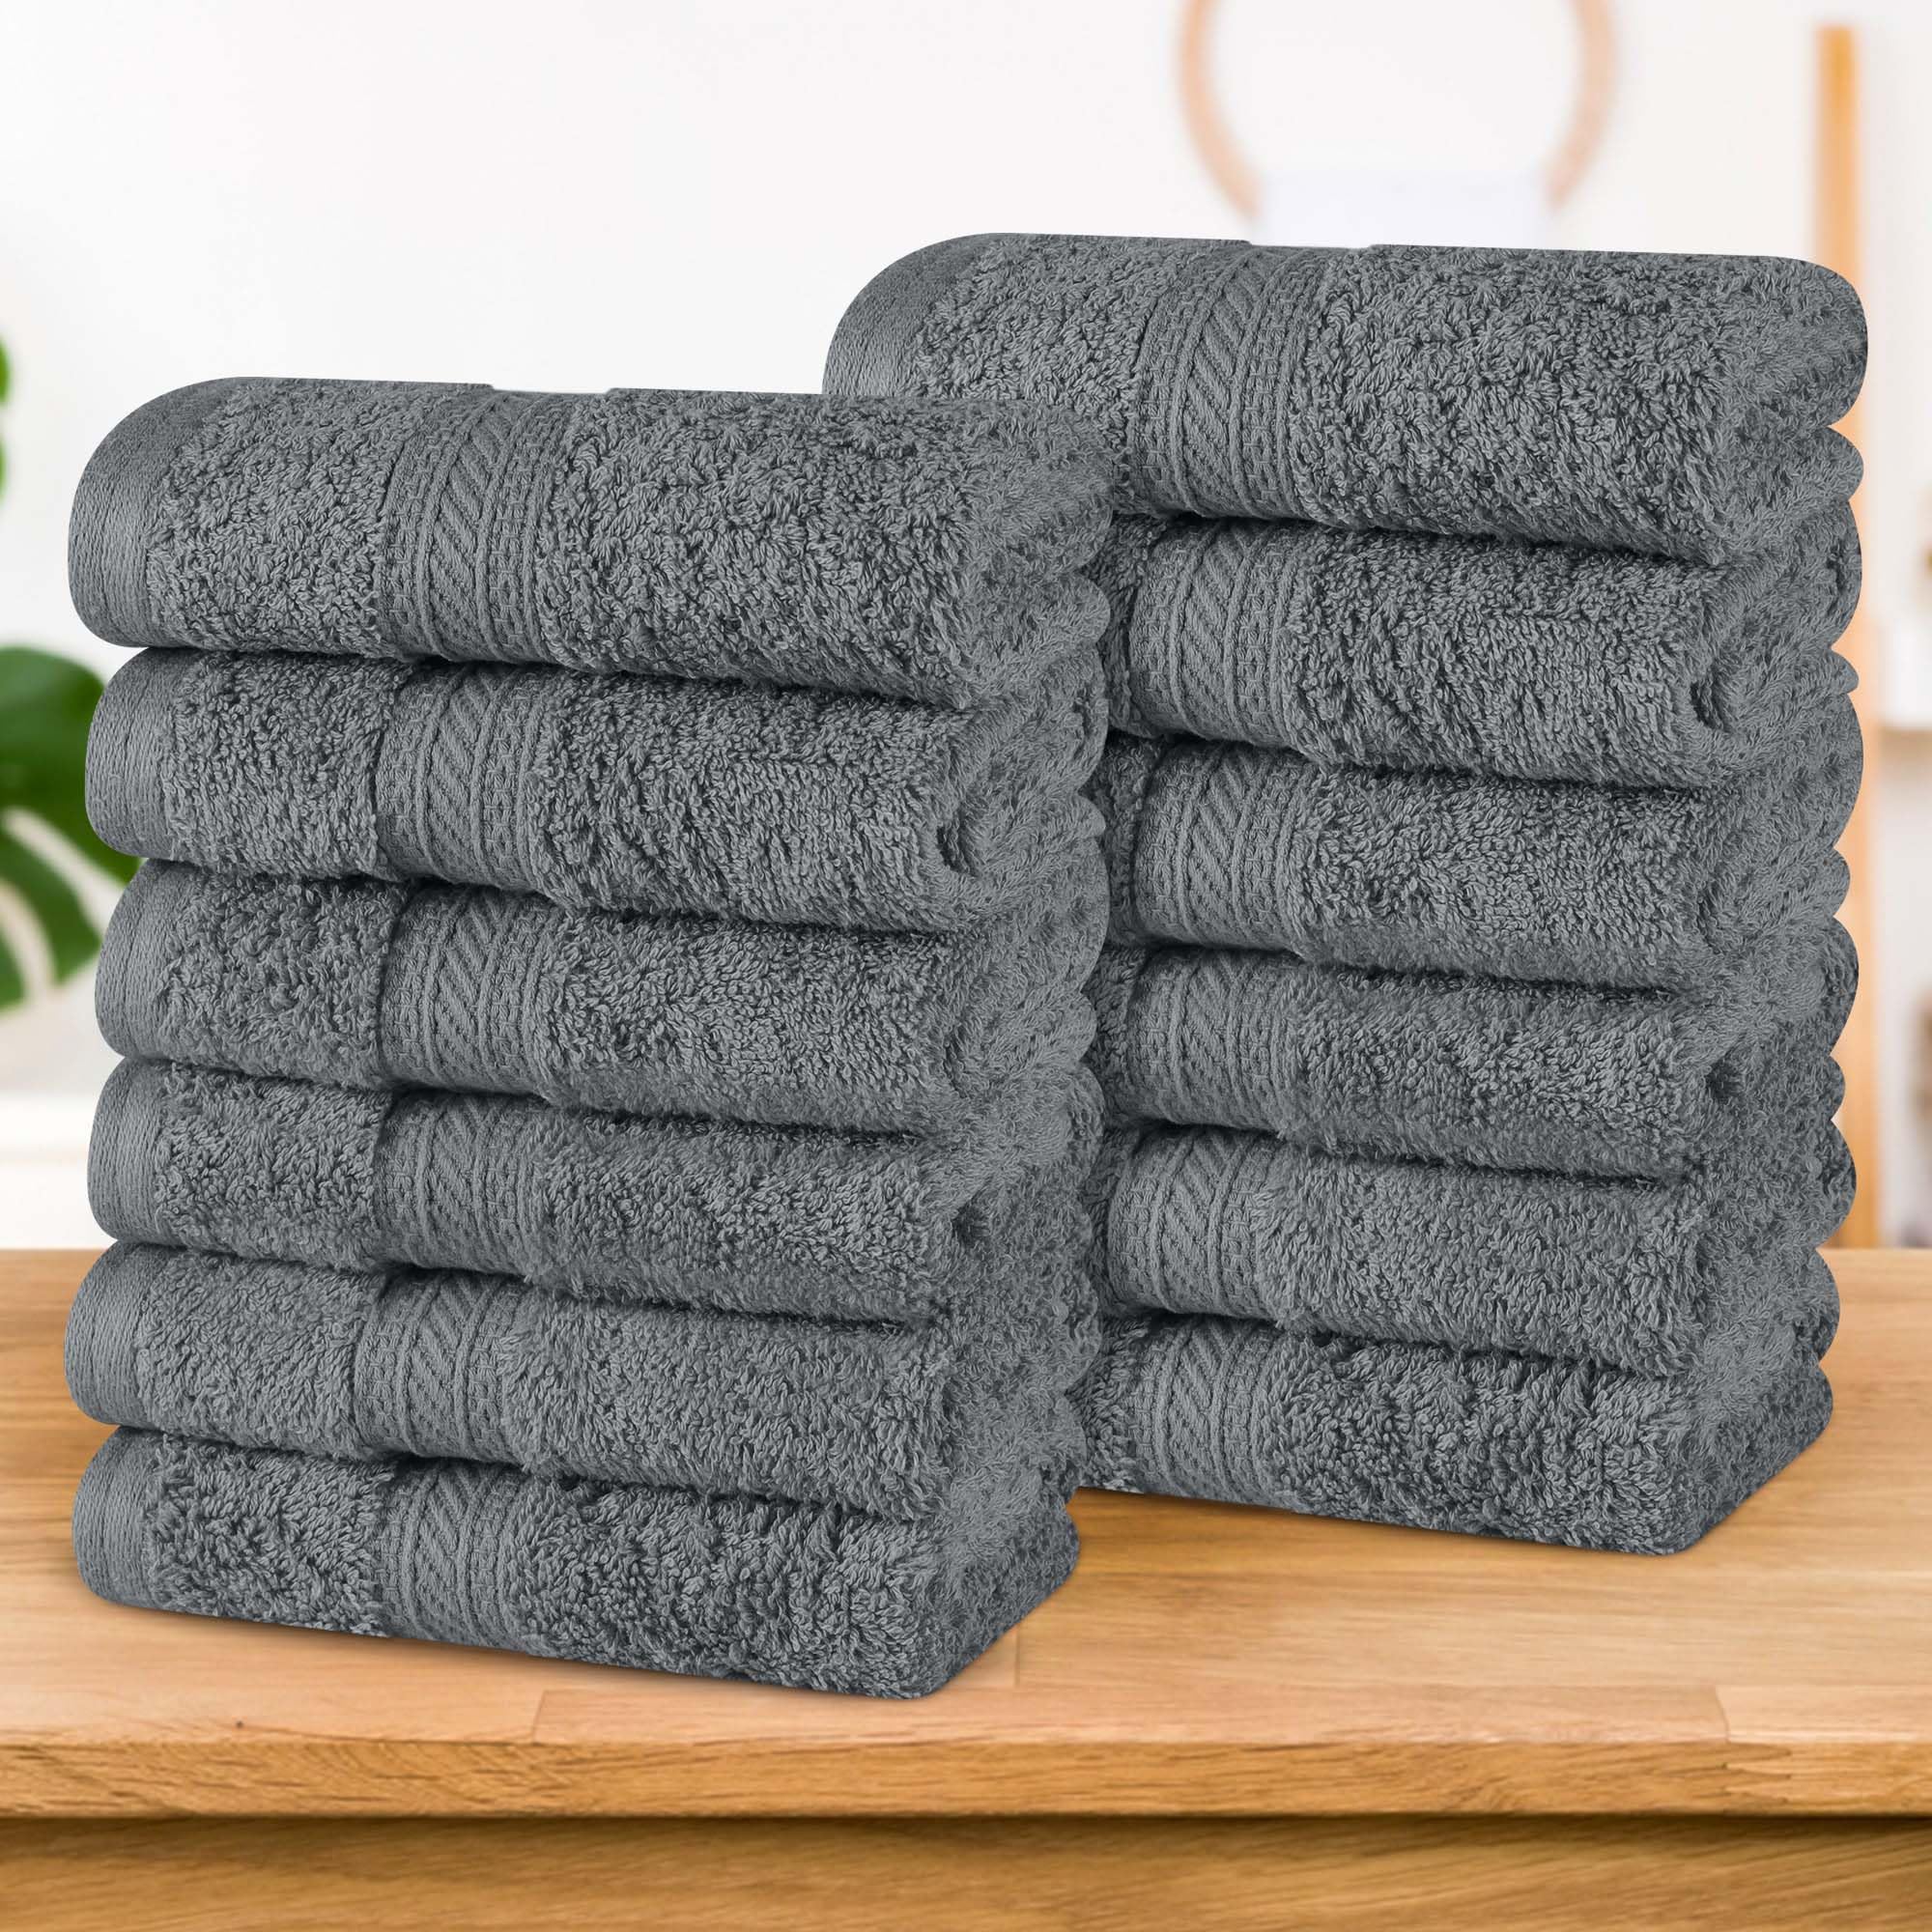 Superior Cotton Face Towels/Washcloth Set of 12, Home Essentials, Quick Dry, Luxury Bathroom Accessories, Basic Towels, Spa, Salon, Hotel, Resort, Thick, Ultra-Plush, Highly Absorbent, Grey